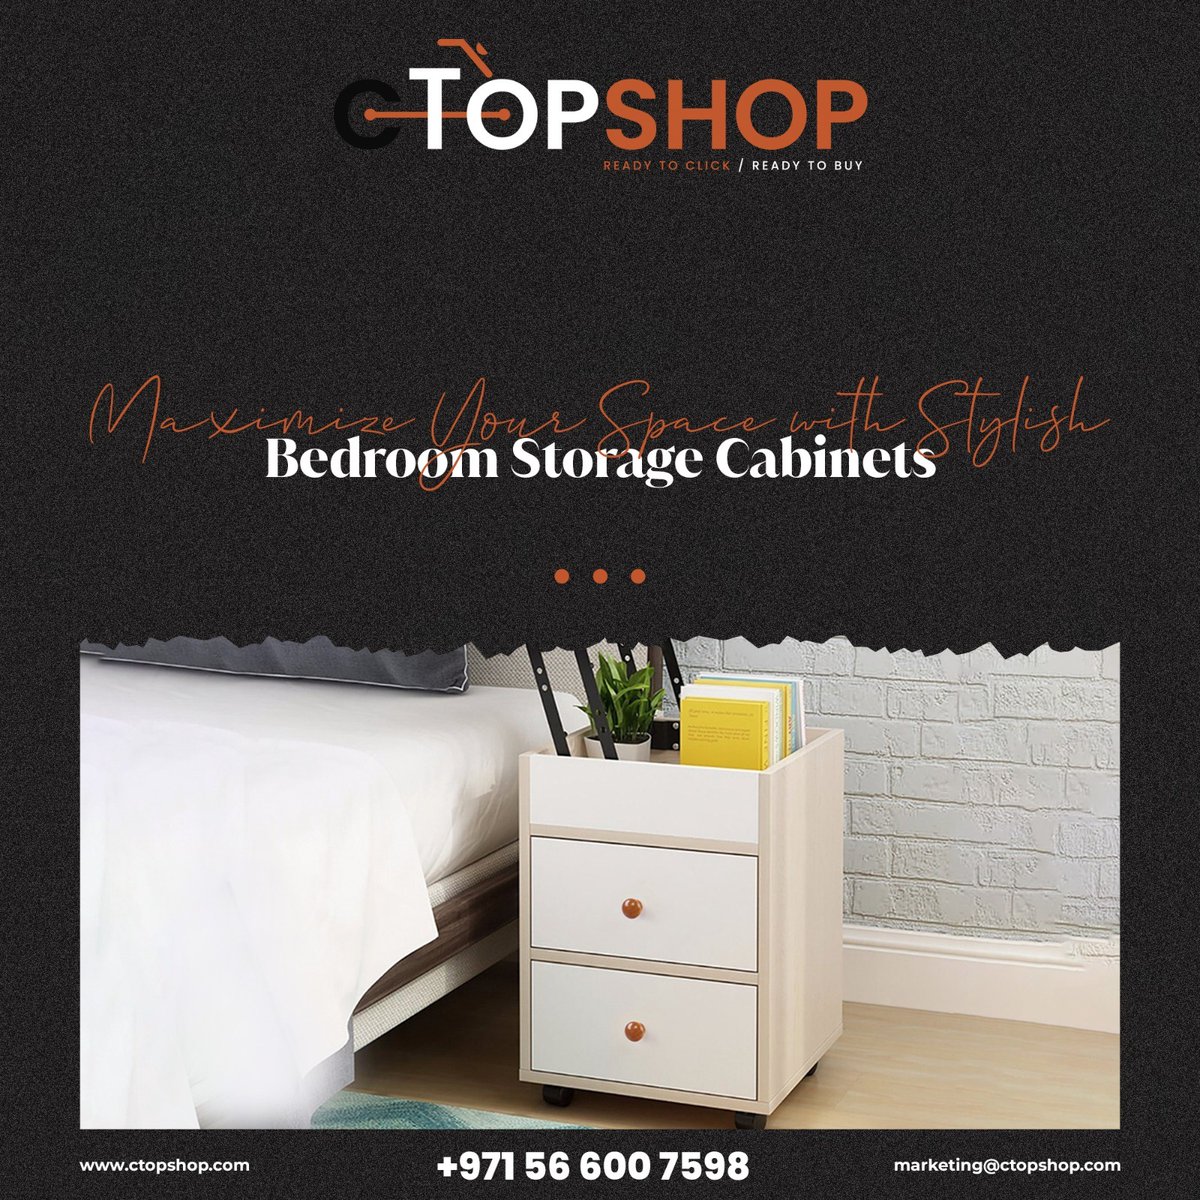 Upgrade your bedroom storage game with CTOPSHOP's stylish cabinets! From sleek and modern to rustic and charming, our storage solutions will declutter your space in style. Shop now and transform your bedroom into an organized oasis! 🚪🗄️ #CTOPSHOP #bedroomstorage #organization